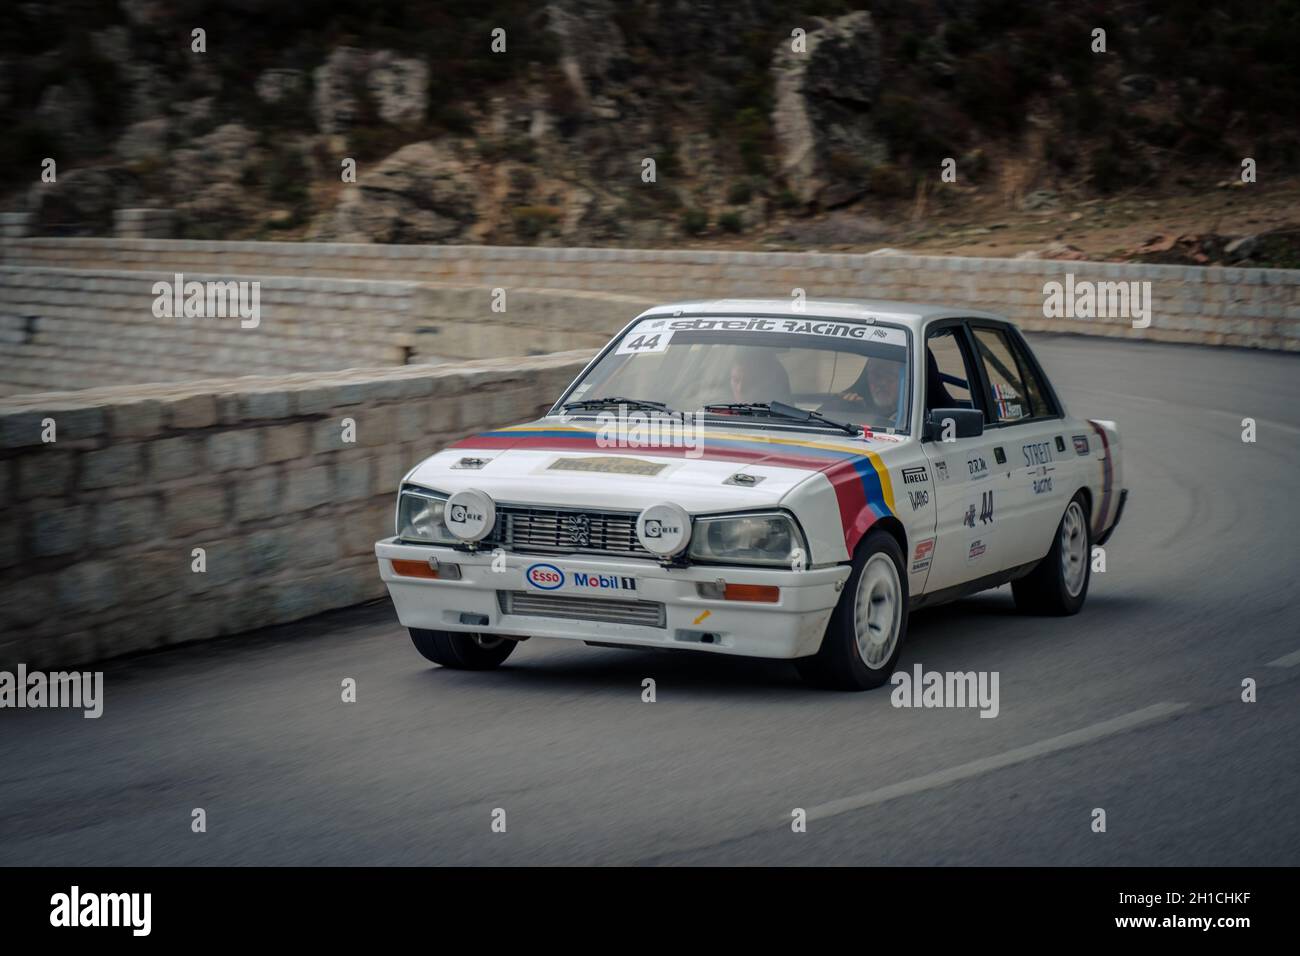 Occhiatana, Corsica, France - 7th October 2020: Serge Zele and Philippe Bouvier compete in their Peugeot 505 Turbo in the 2021 Tour de Corse Historiqu Stock Photo